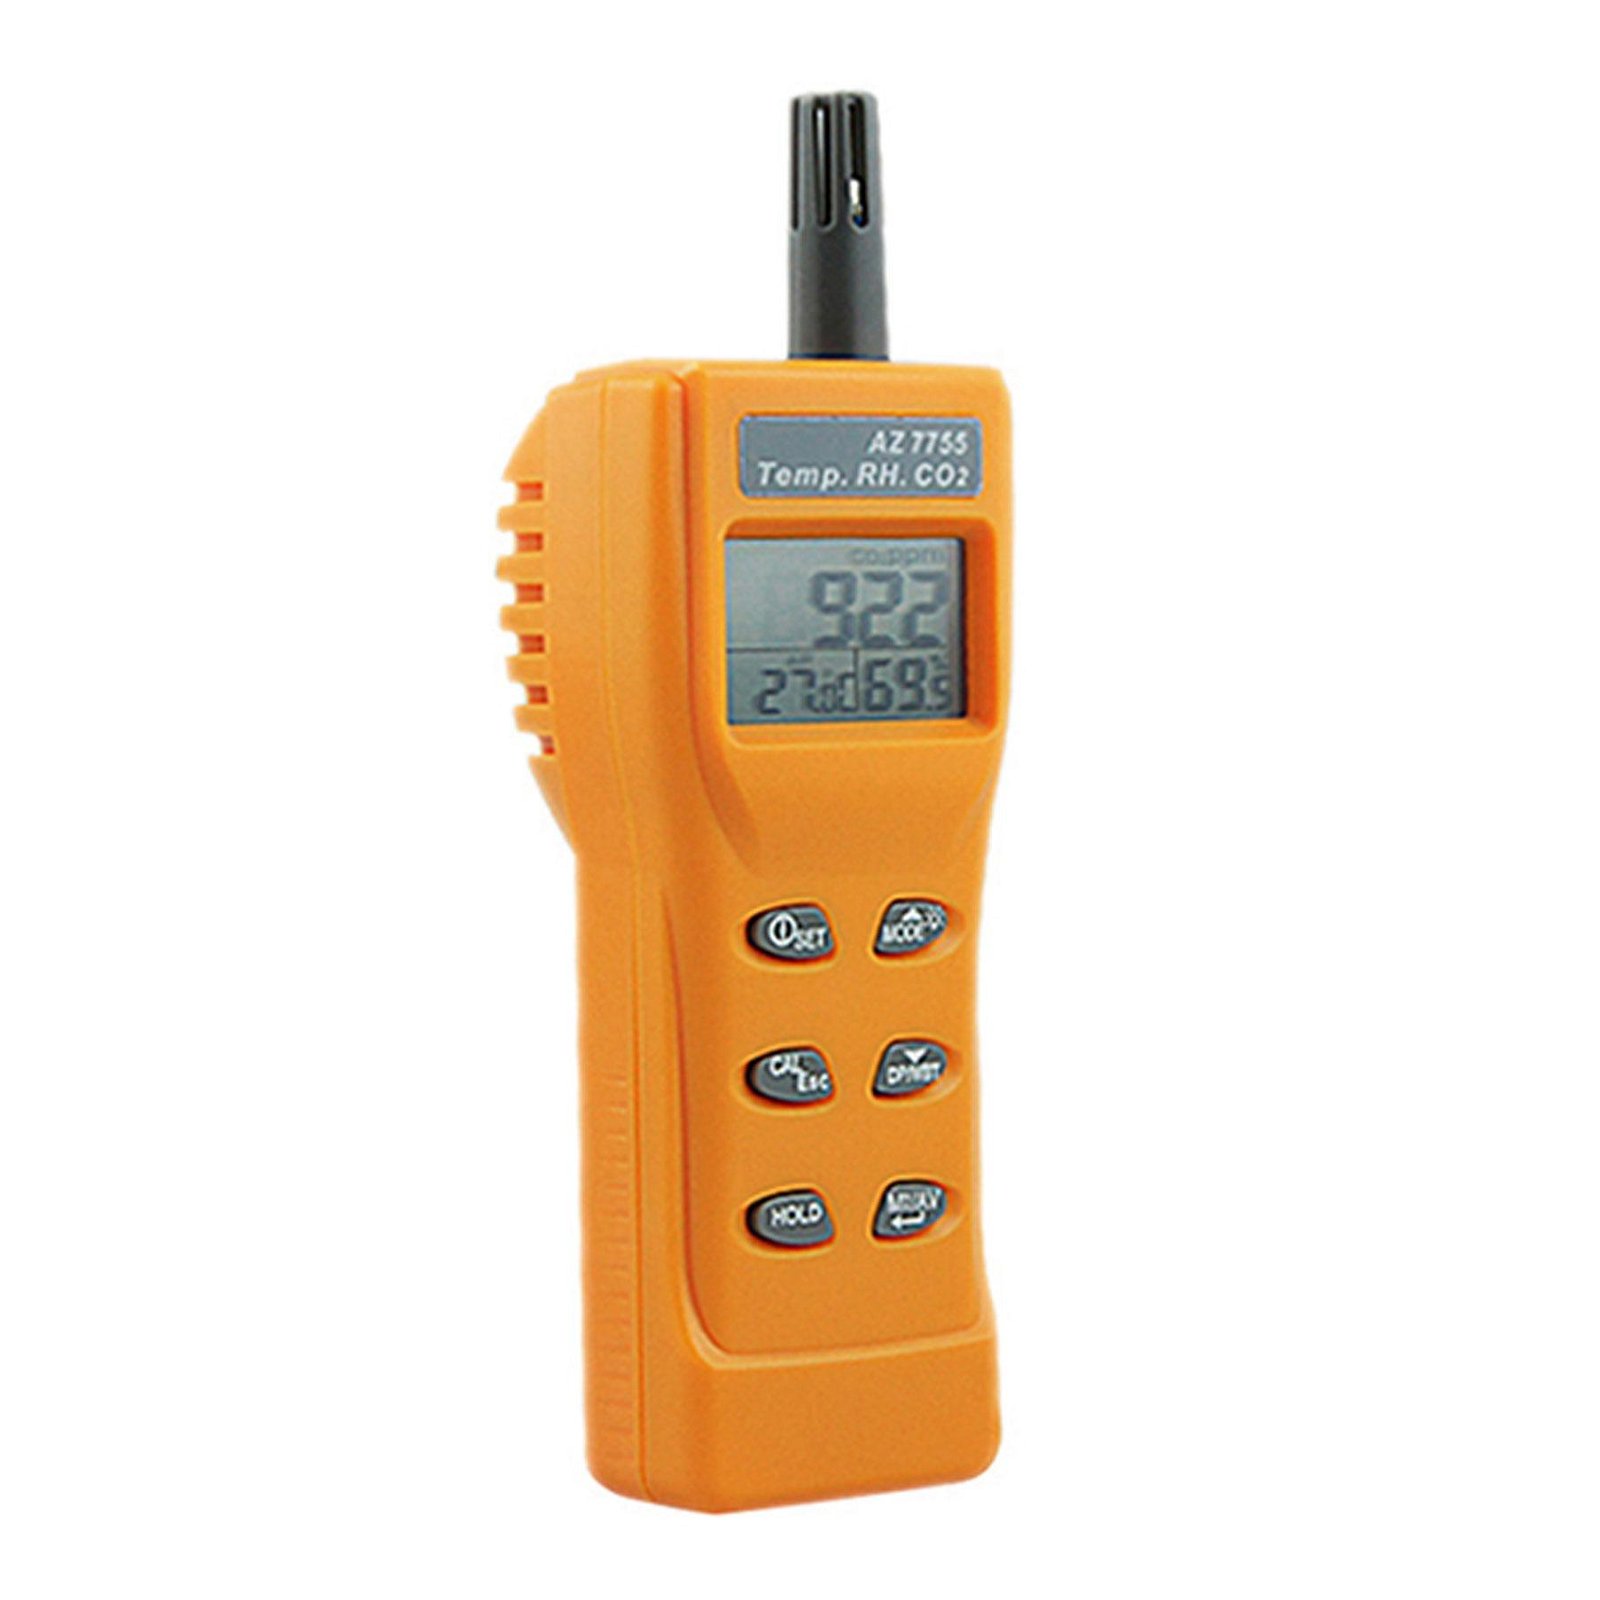 AZ7755 Handheld CO2 Gas Monitor Temperature Humidity Indoor Air Quality Tester 3